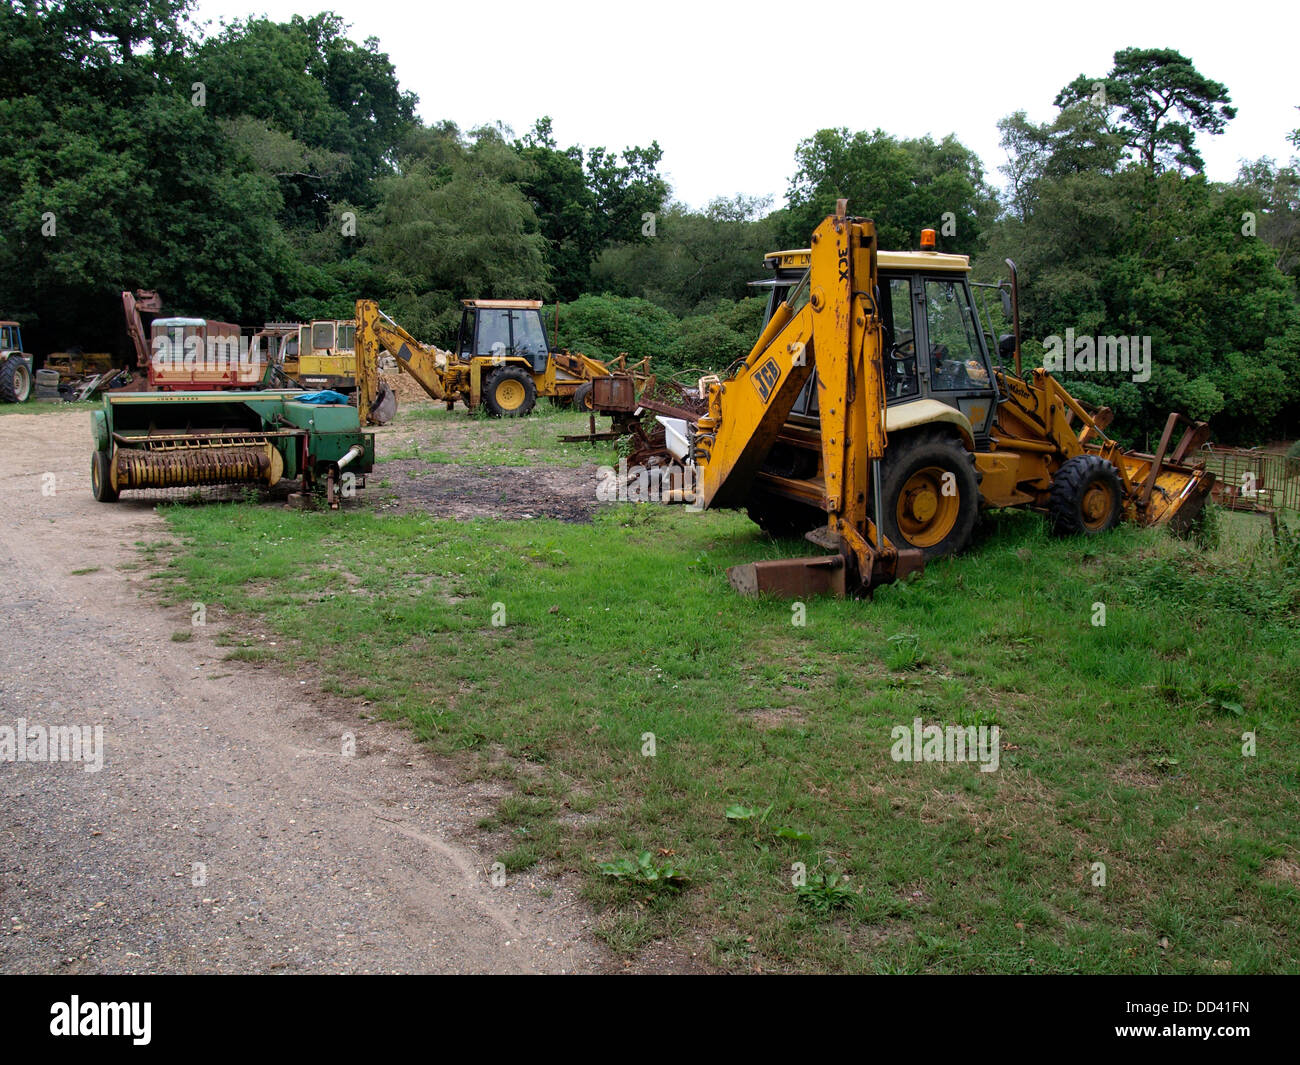 Old rusty diggers and farm equipment, UK 2013 Stock Photo